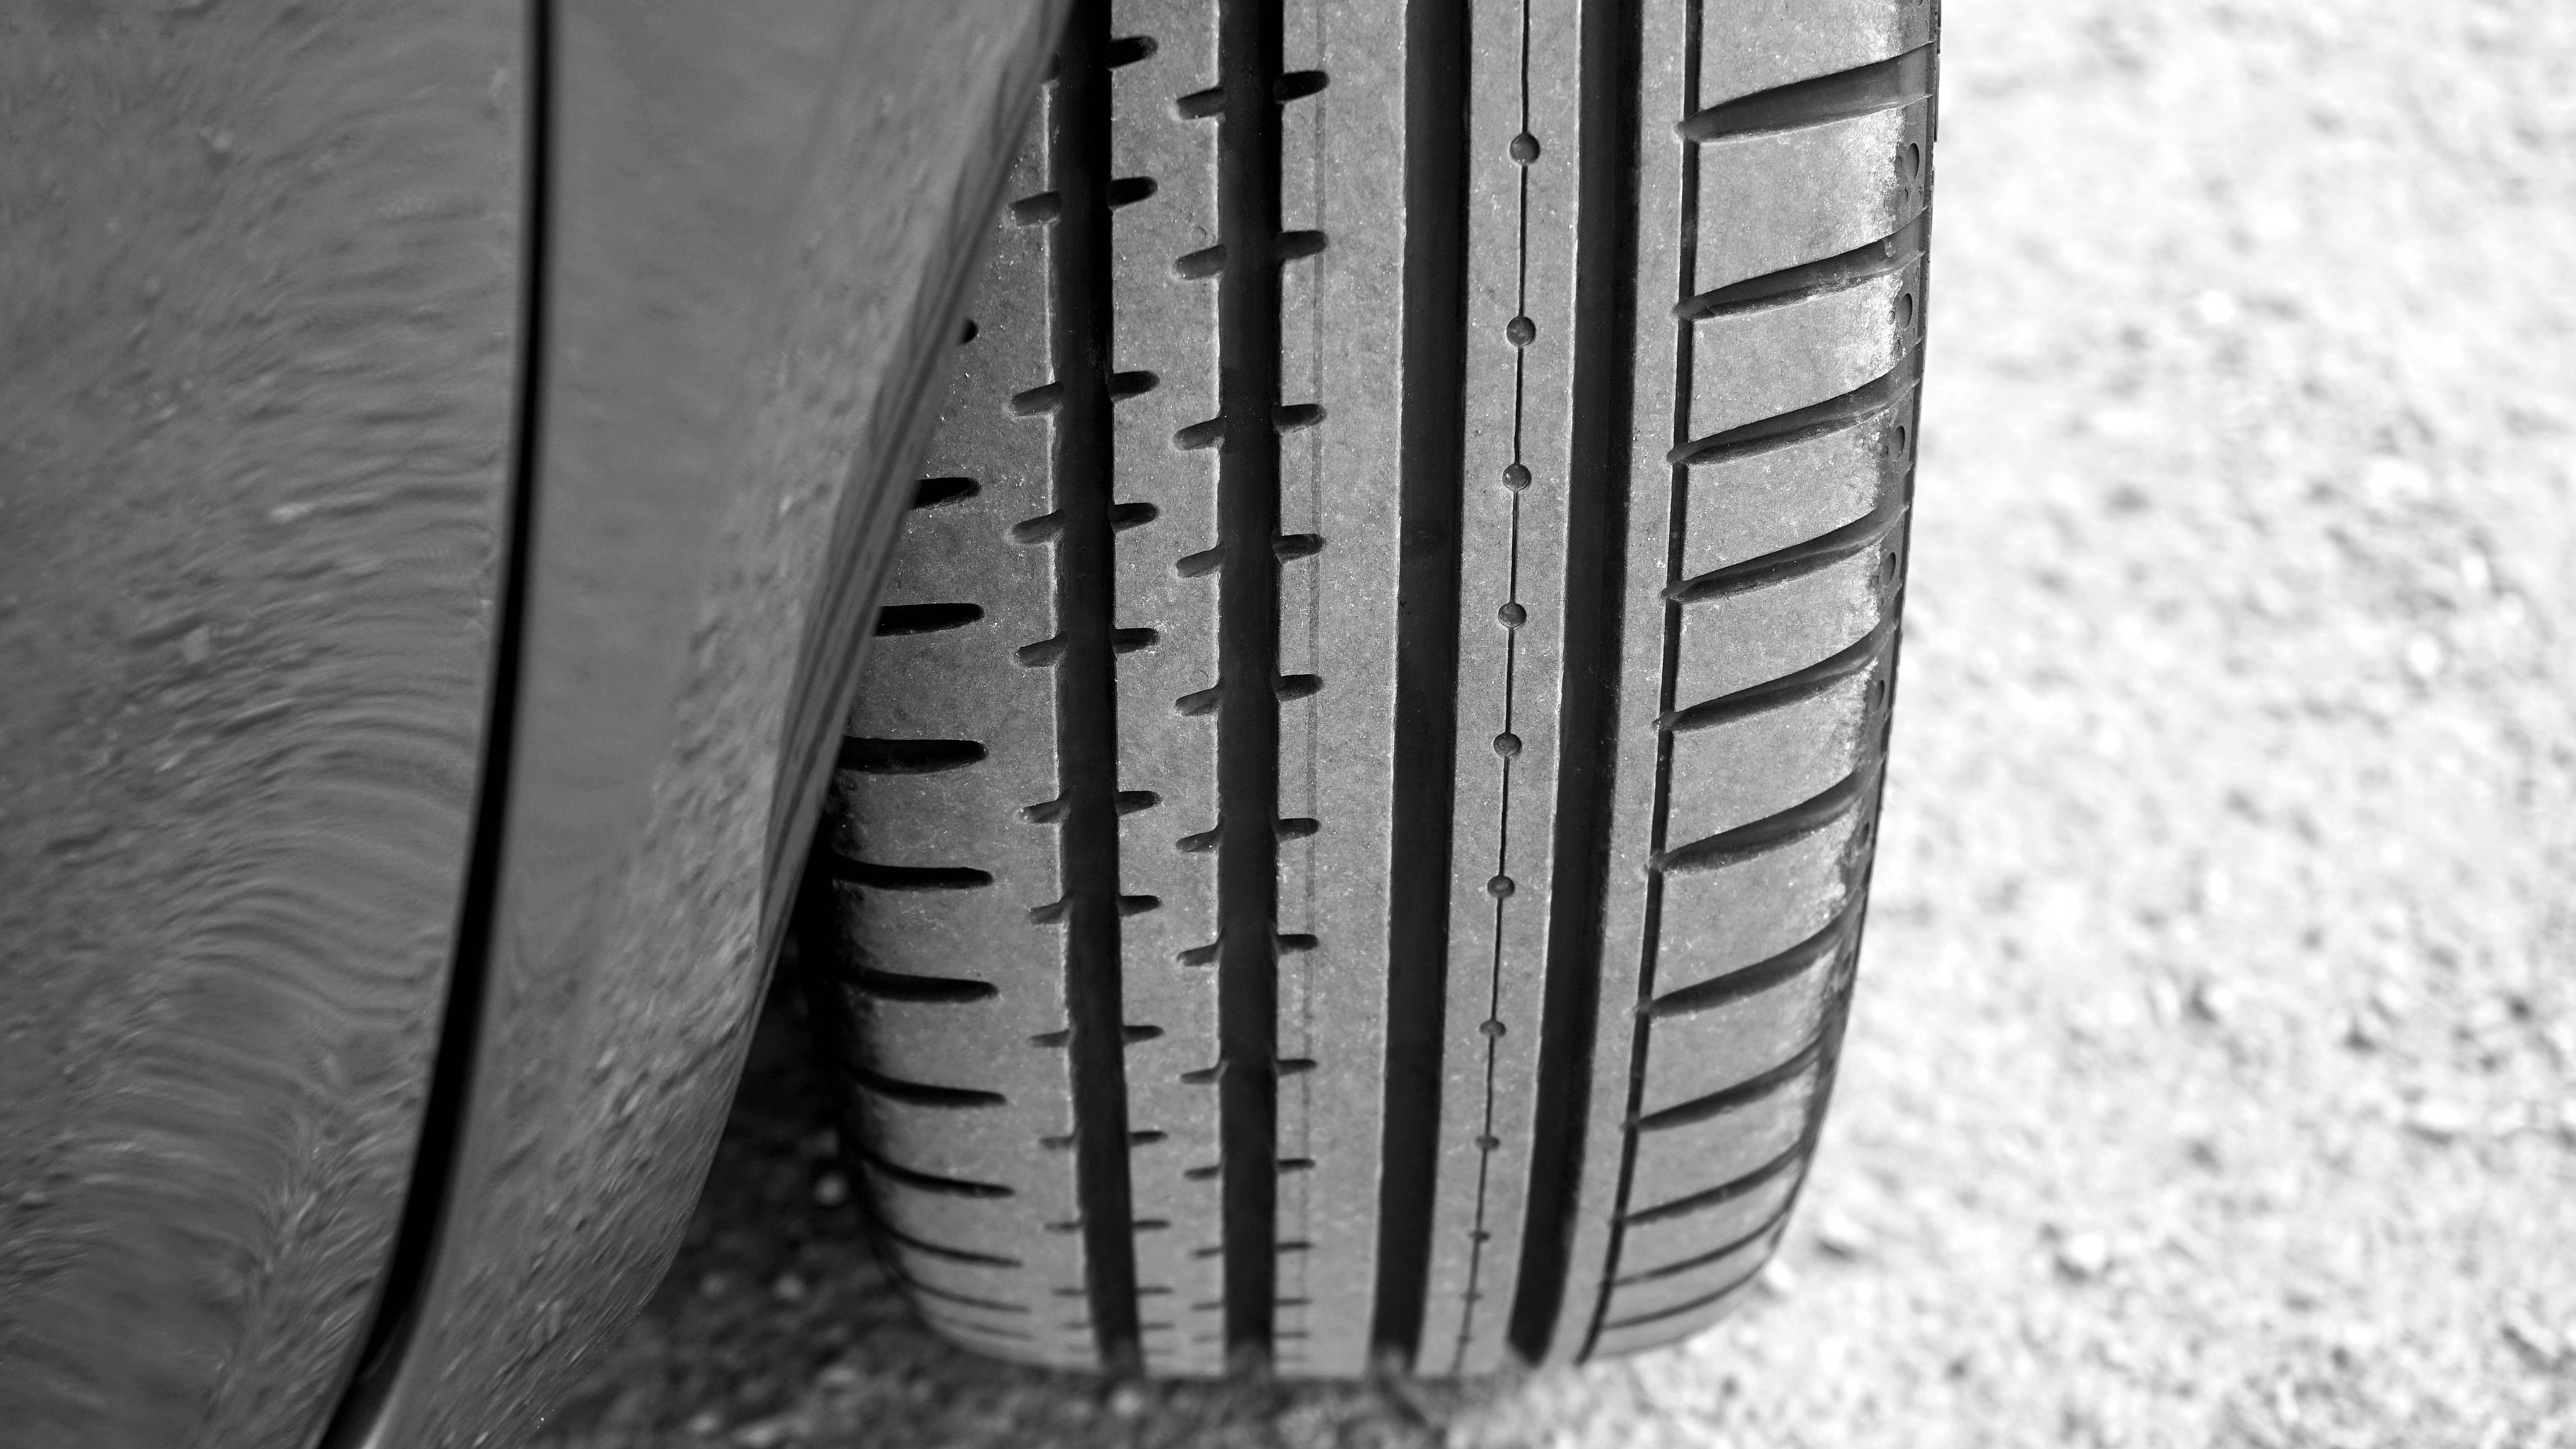 If you’re driving with tires that are defective, you may be compromising the safety of yourself and others.